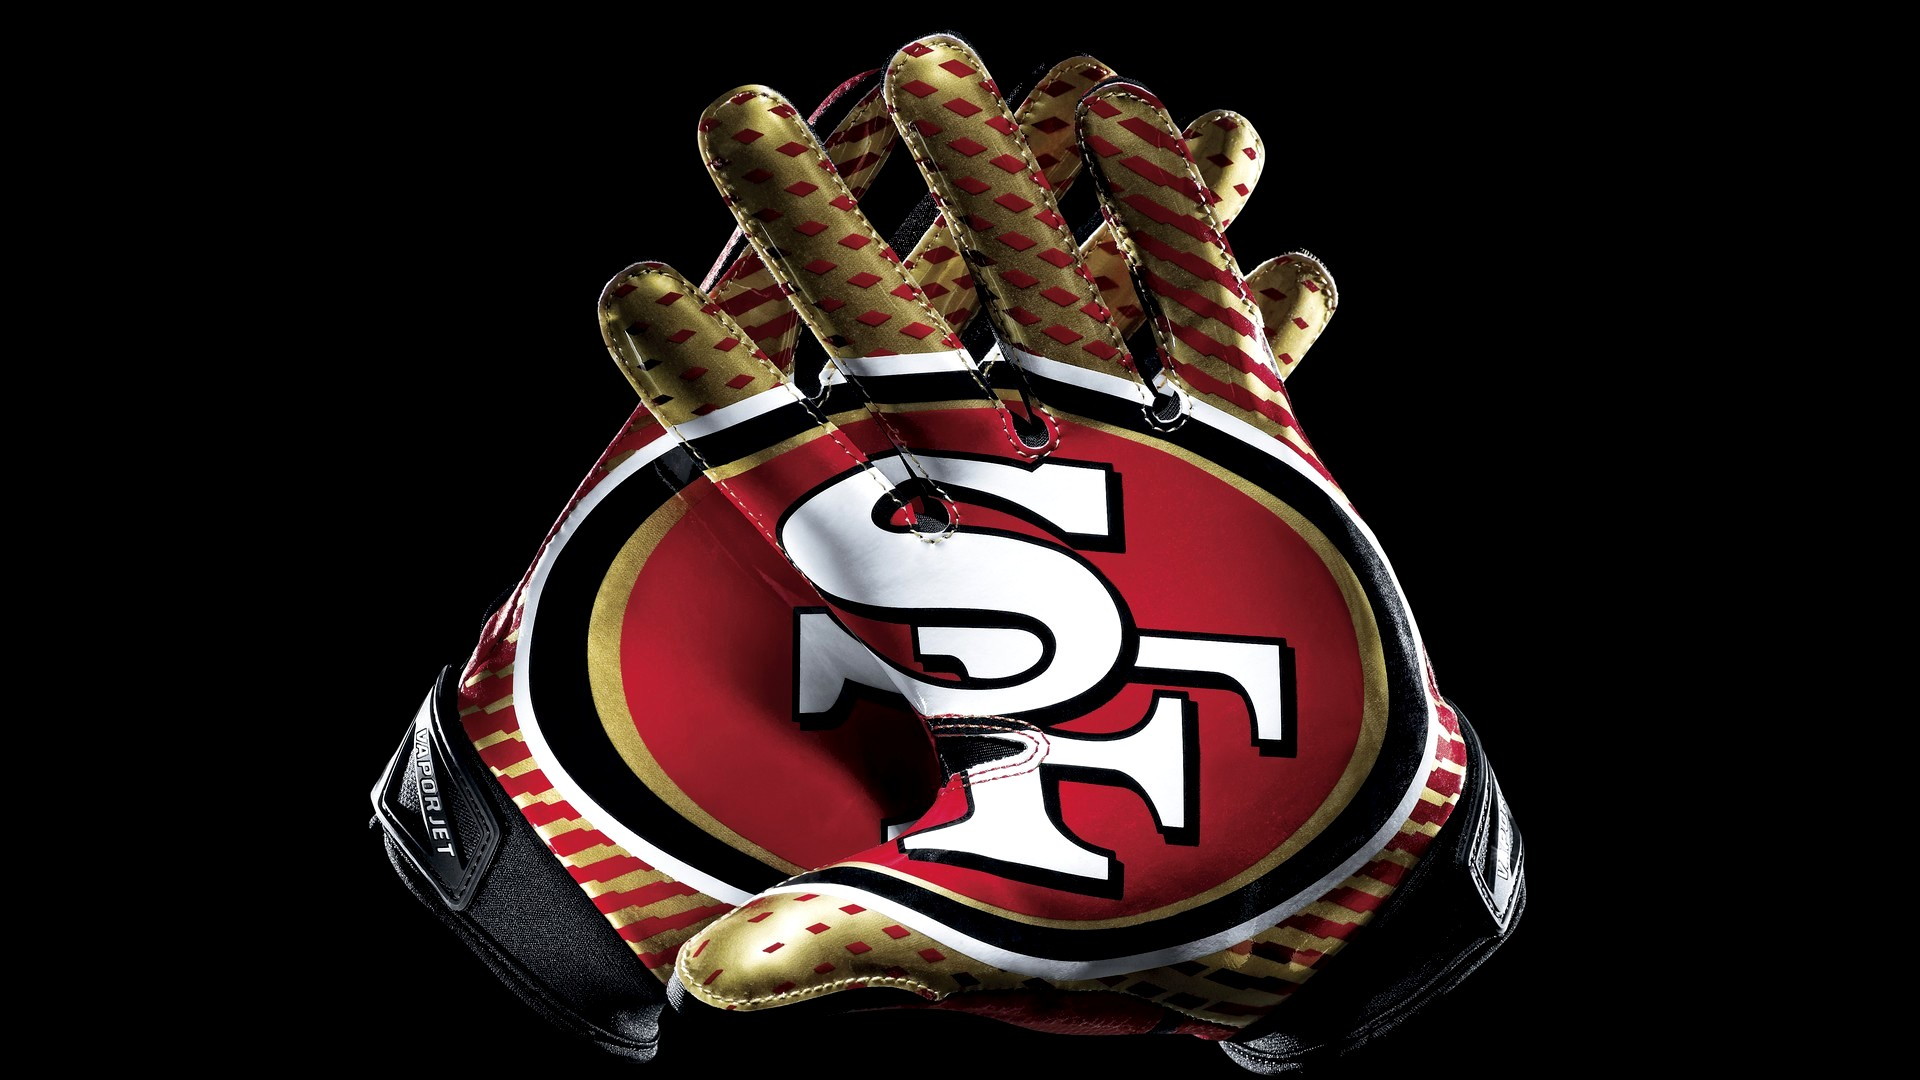 Best San Francisco 49ers Wallpaper in HD with high-resolution 1920x1080 pixel. You can use and set as wallpaper for Notebook Screensavers, Mac Wallpapers, Mobile Home Screen, iPhone or Android Phones Lock Screen